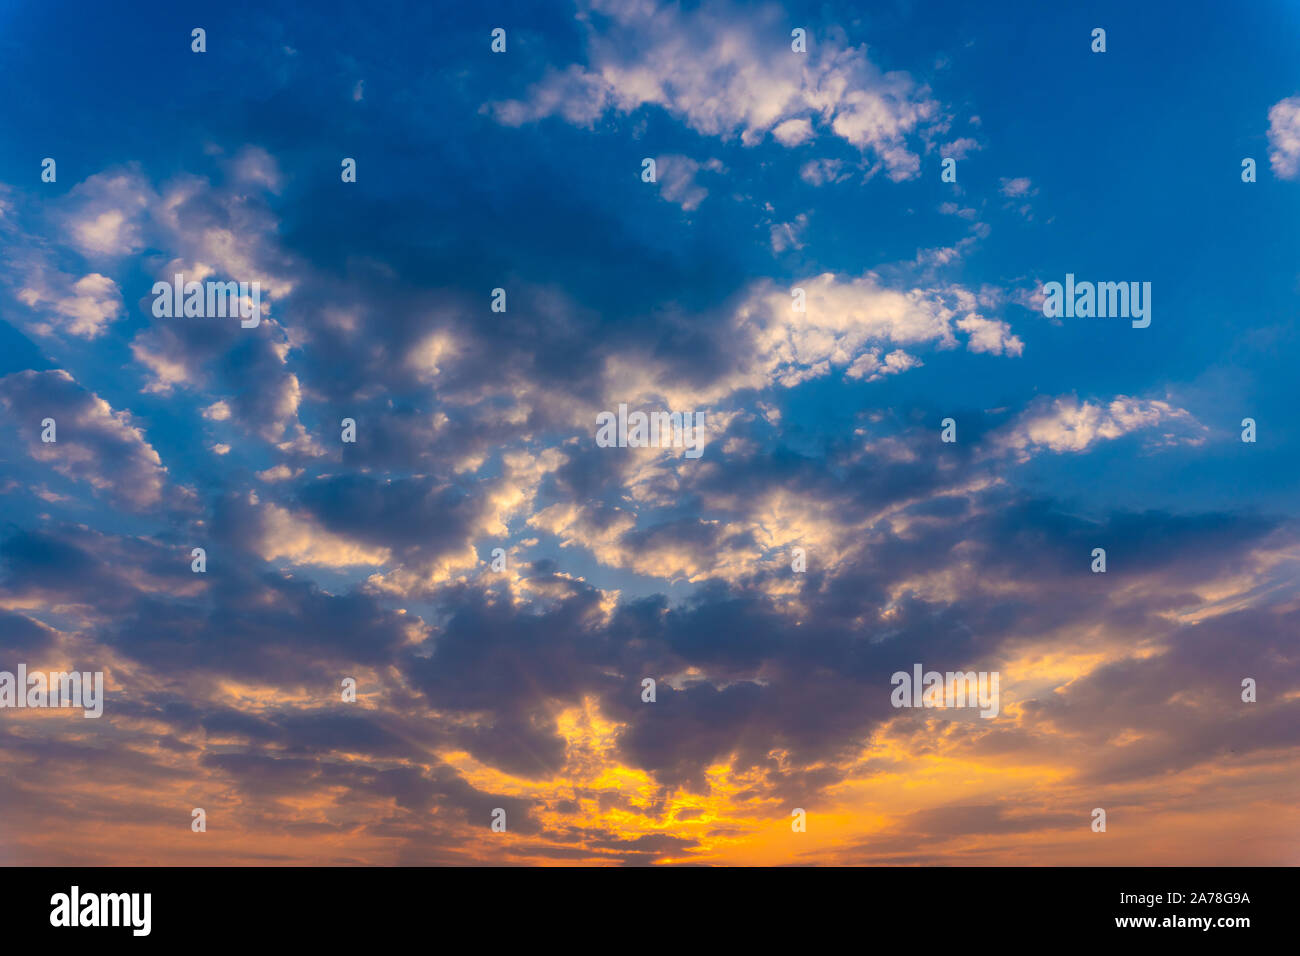 Amazing beauty evening sunset sky with clouds Stock Photo